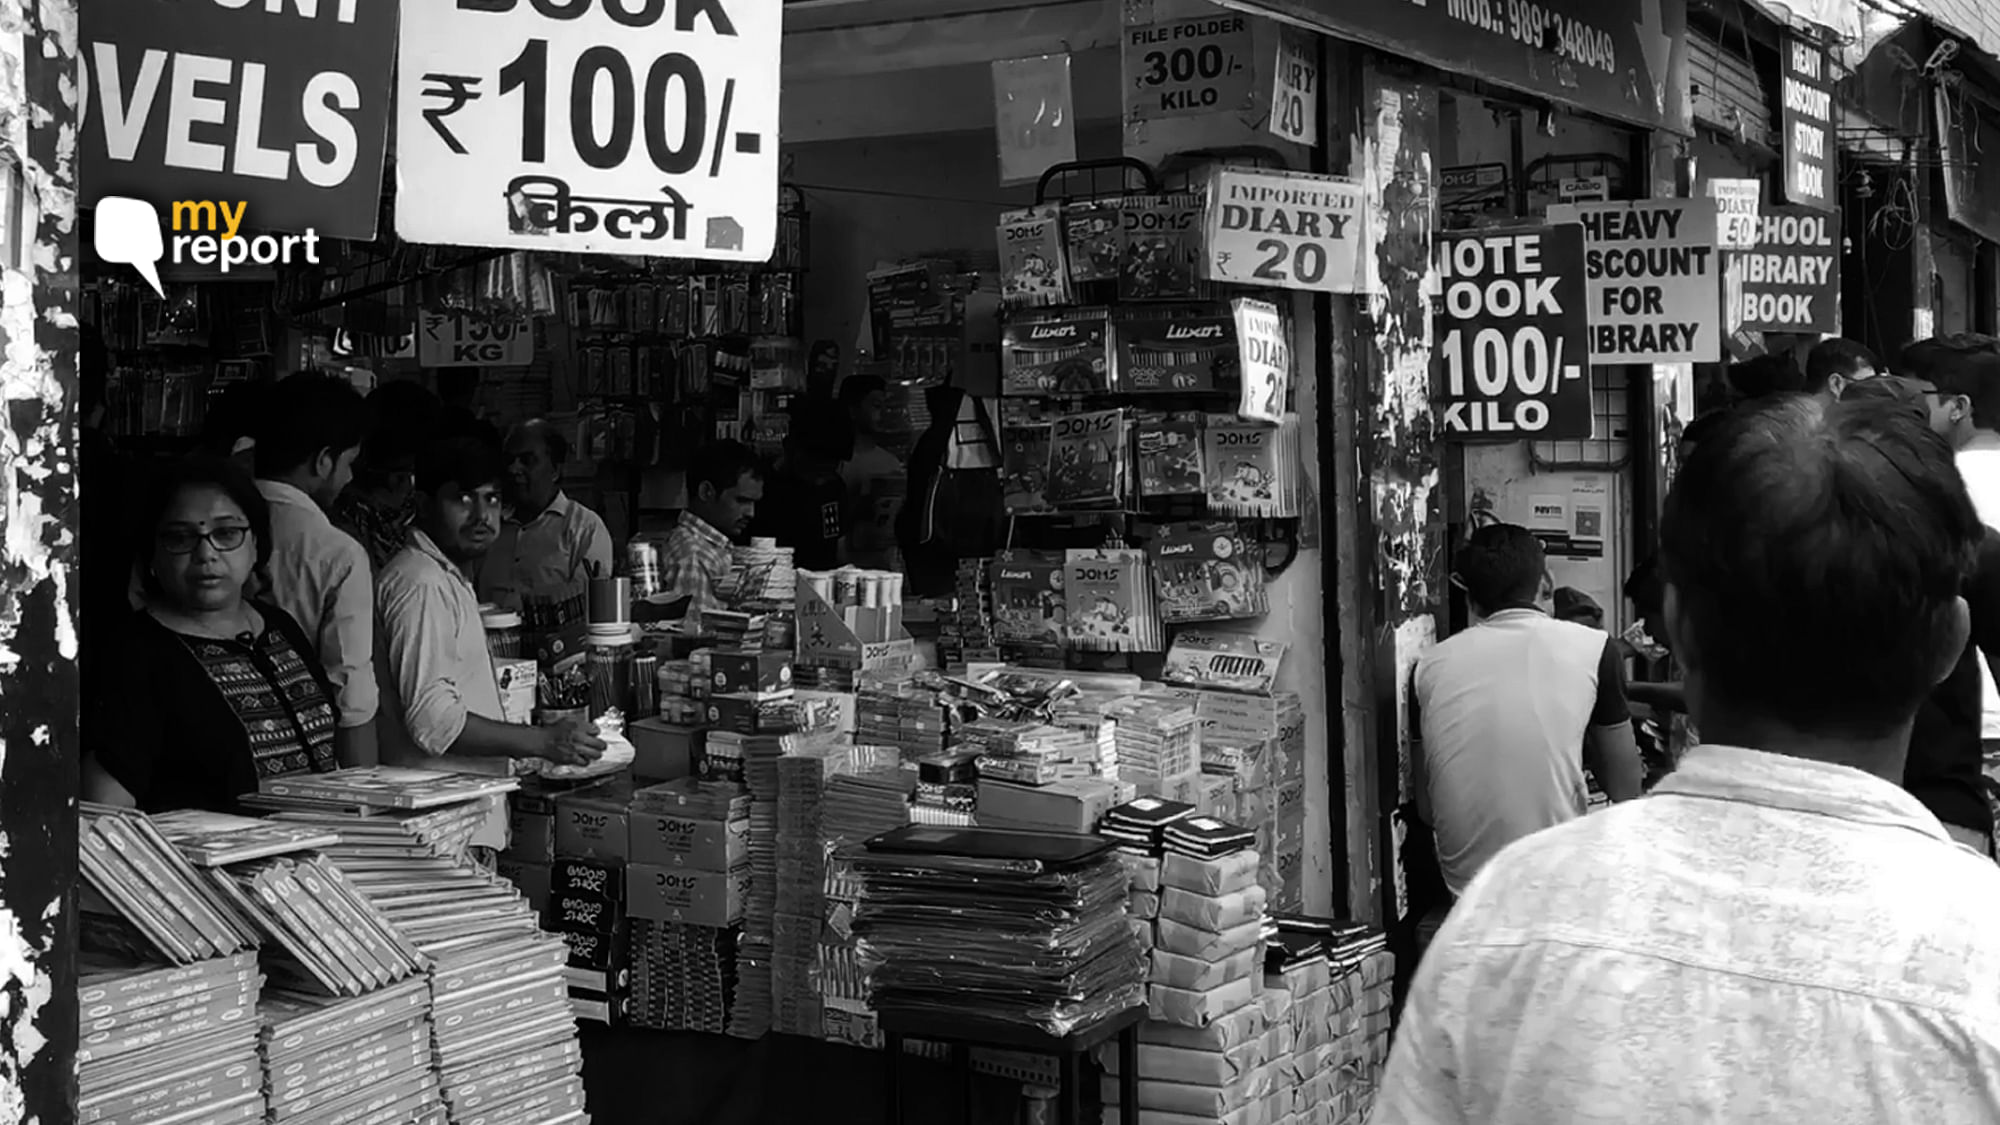 I visited the Daryaganj book market after a month along with a friend and we didn’t like what we saw.